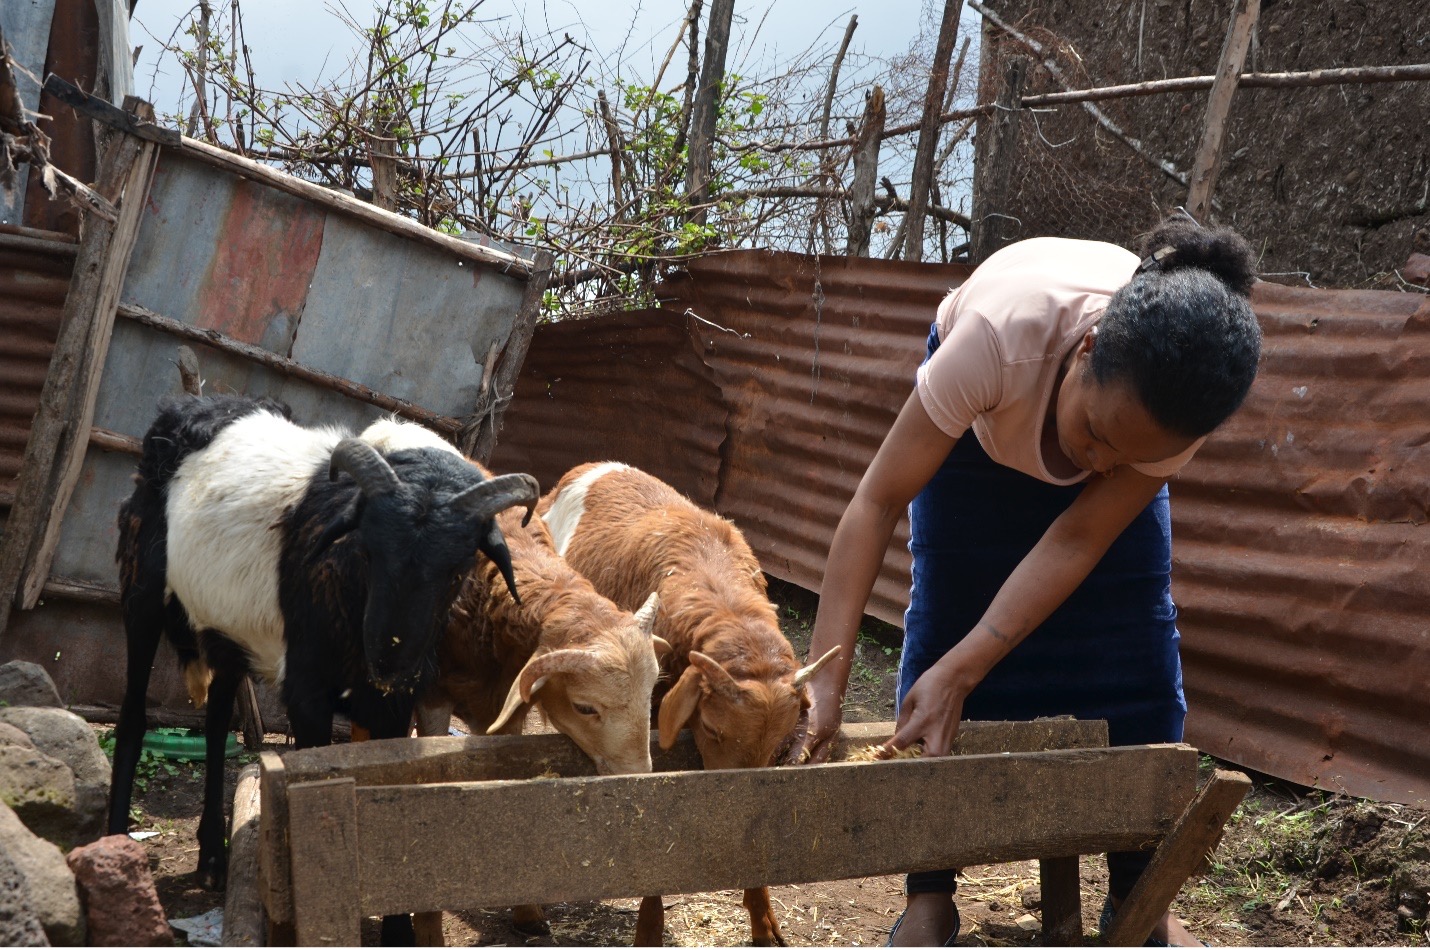 Fantu provides feed to some of the sheep she fattens for sale. Photo: UN Women/Fikerte Abebe